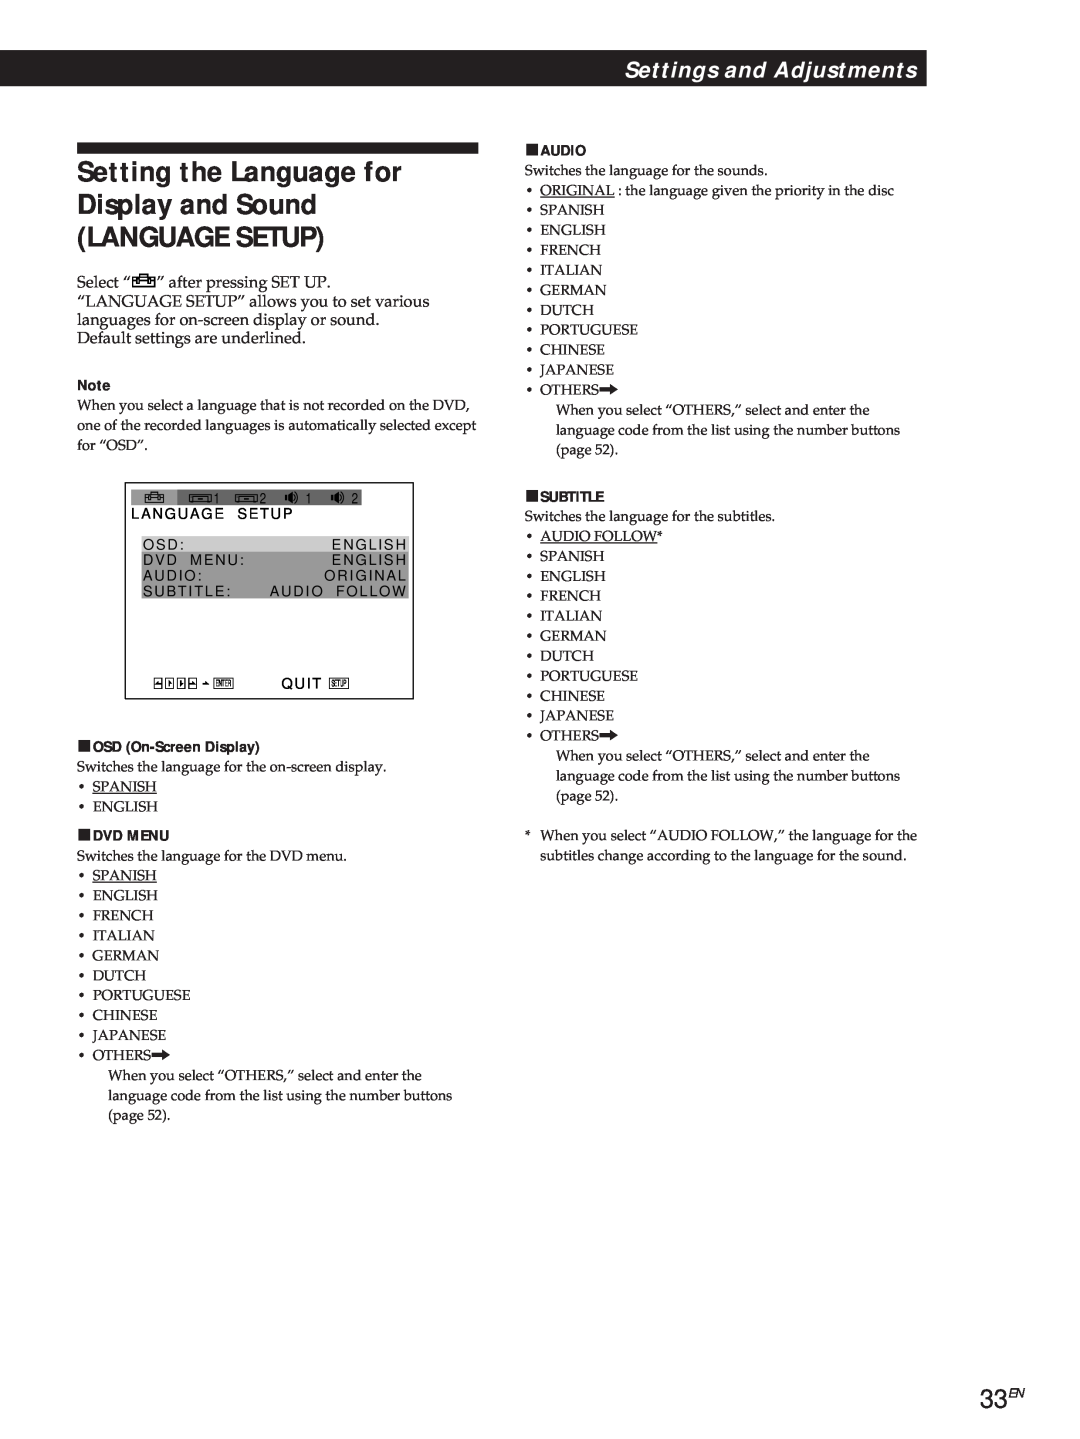 Sony DVP-S500D manual Setting the Language for Display and Sound LANGUAGE SETUP, 33EN, Settings and Adjustments, pDVD MENU 